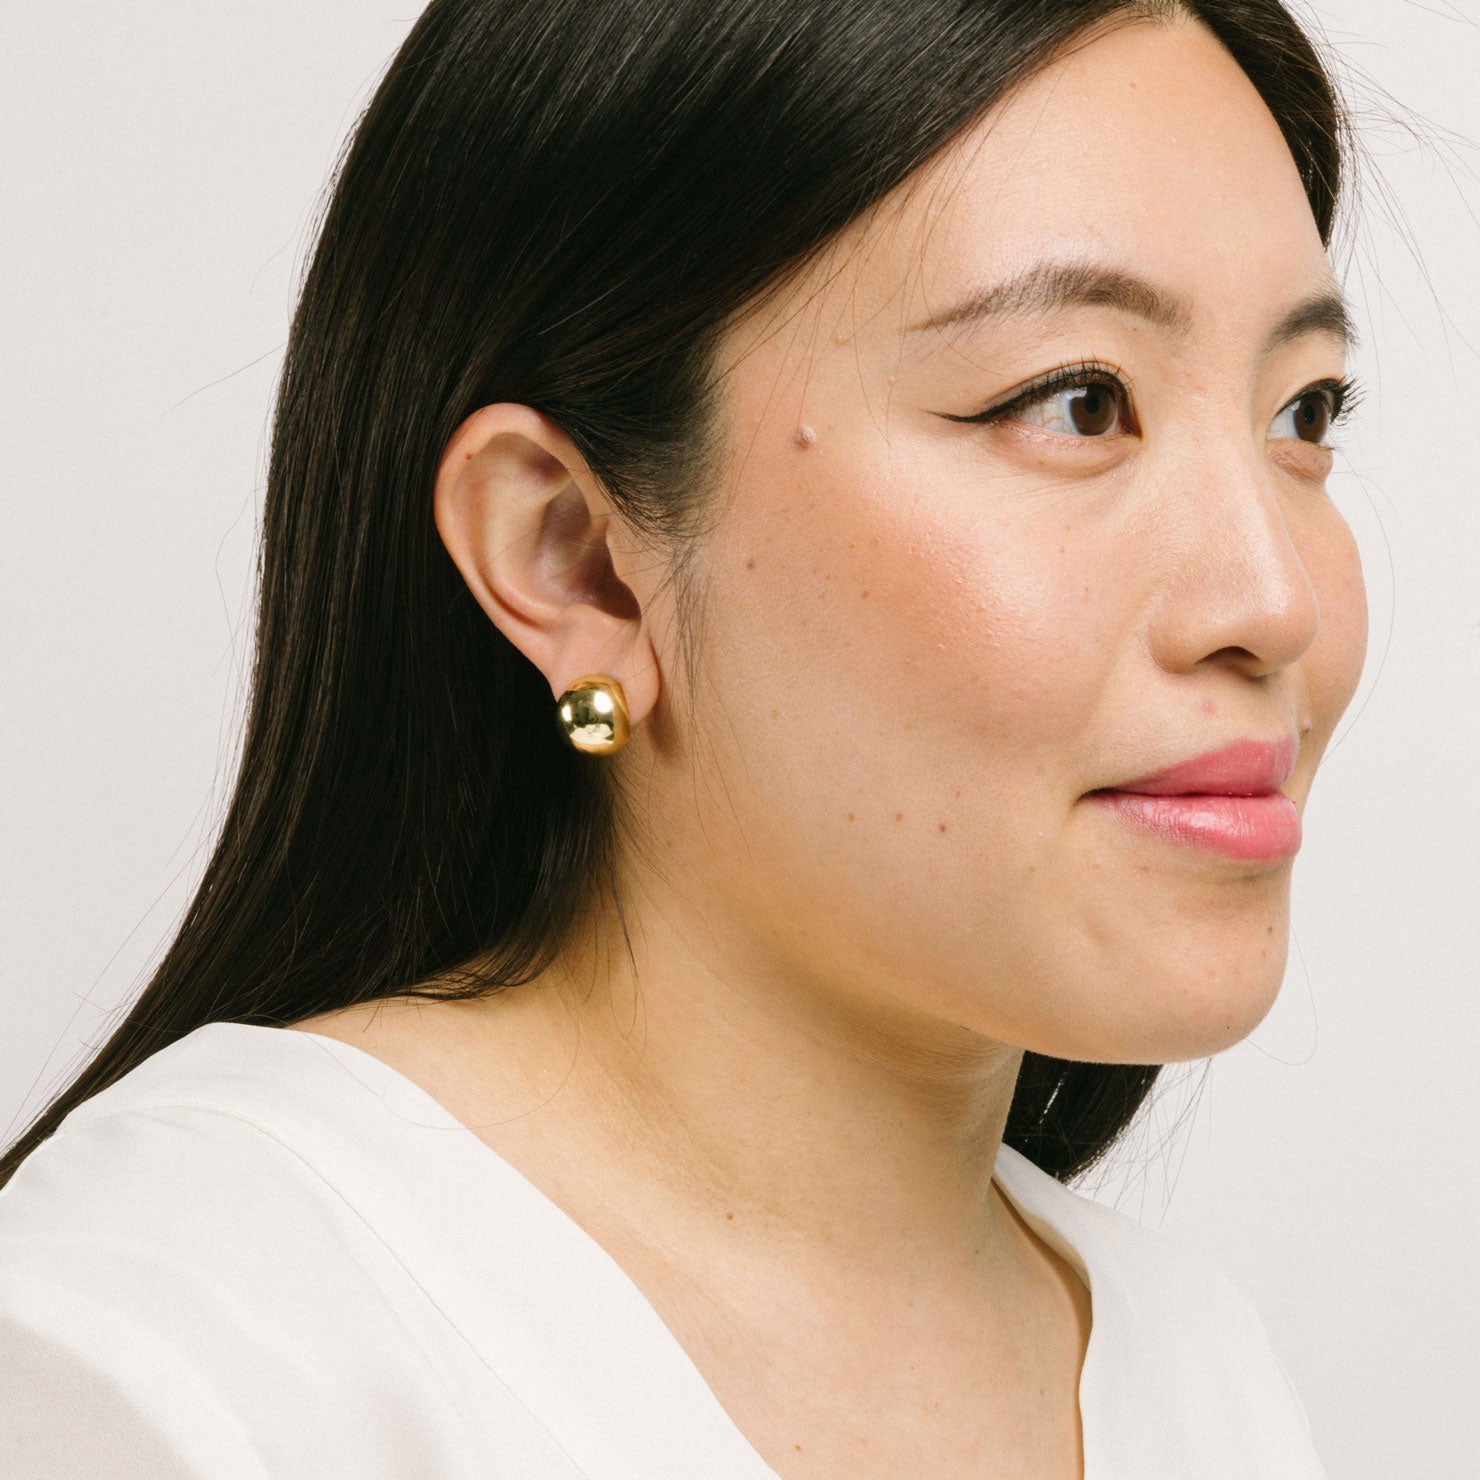 A model wearing the Olive Clip On Earrings feature a Mosquito Coil Clip-On closure type, ideal for all ear types. Average comfortable wear duration is 24 hours, with a medium secure hold. These earrings are adjustable; gently squeeze the padding forward once they are on the ear. Materials are gold tone copper. Please note, item is only one pair.